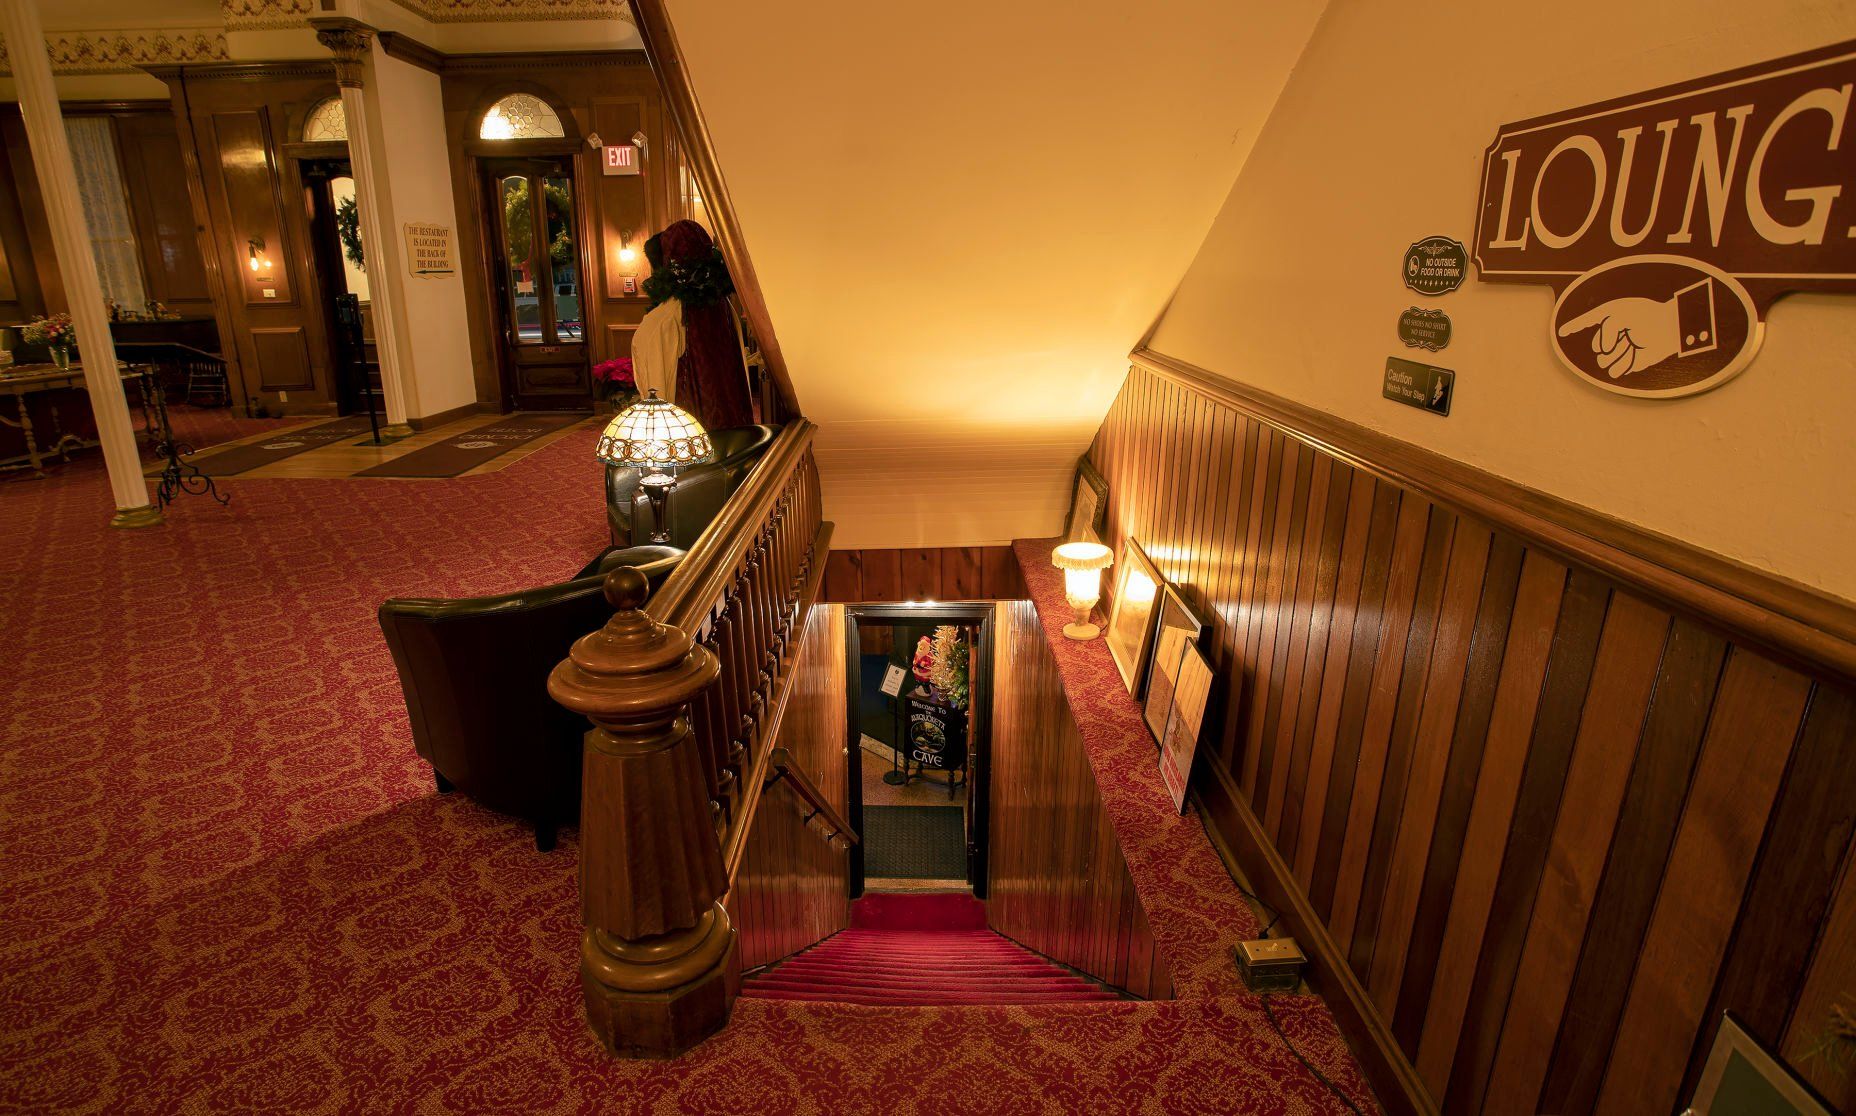 A stairwell leads to The Maquoketa Cave bar at Decker House Hotel in Maquoketa, Iowa, on Thursday, Dec. 23, 2021.    PHOTO CREDIT: Stephen Gassman